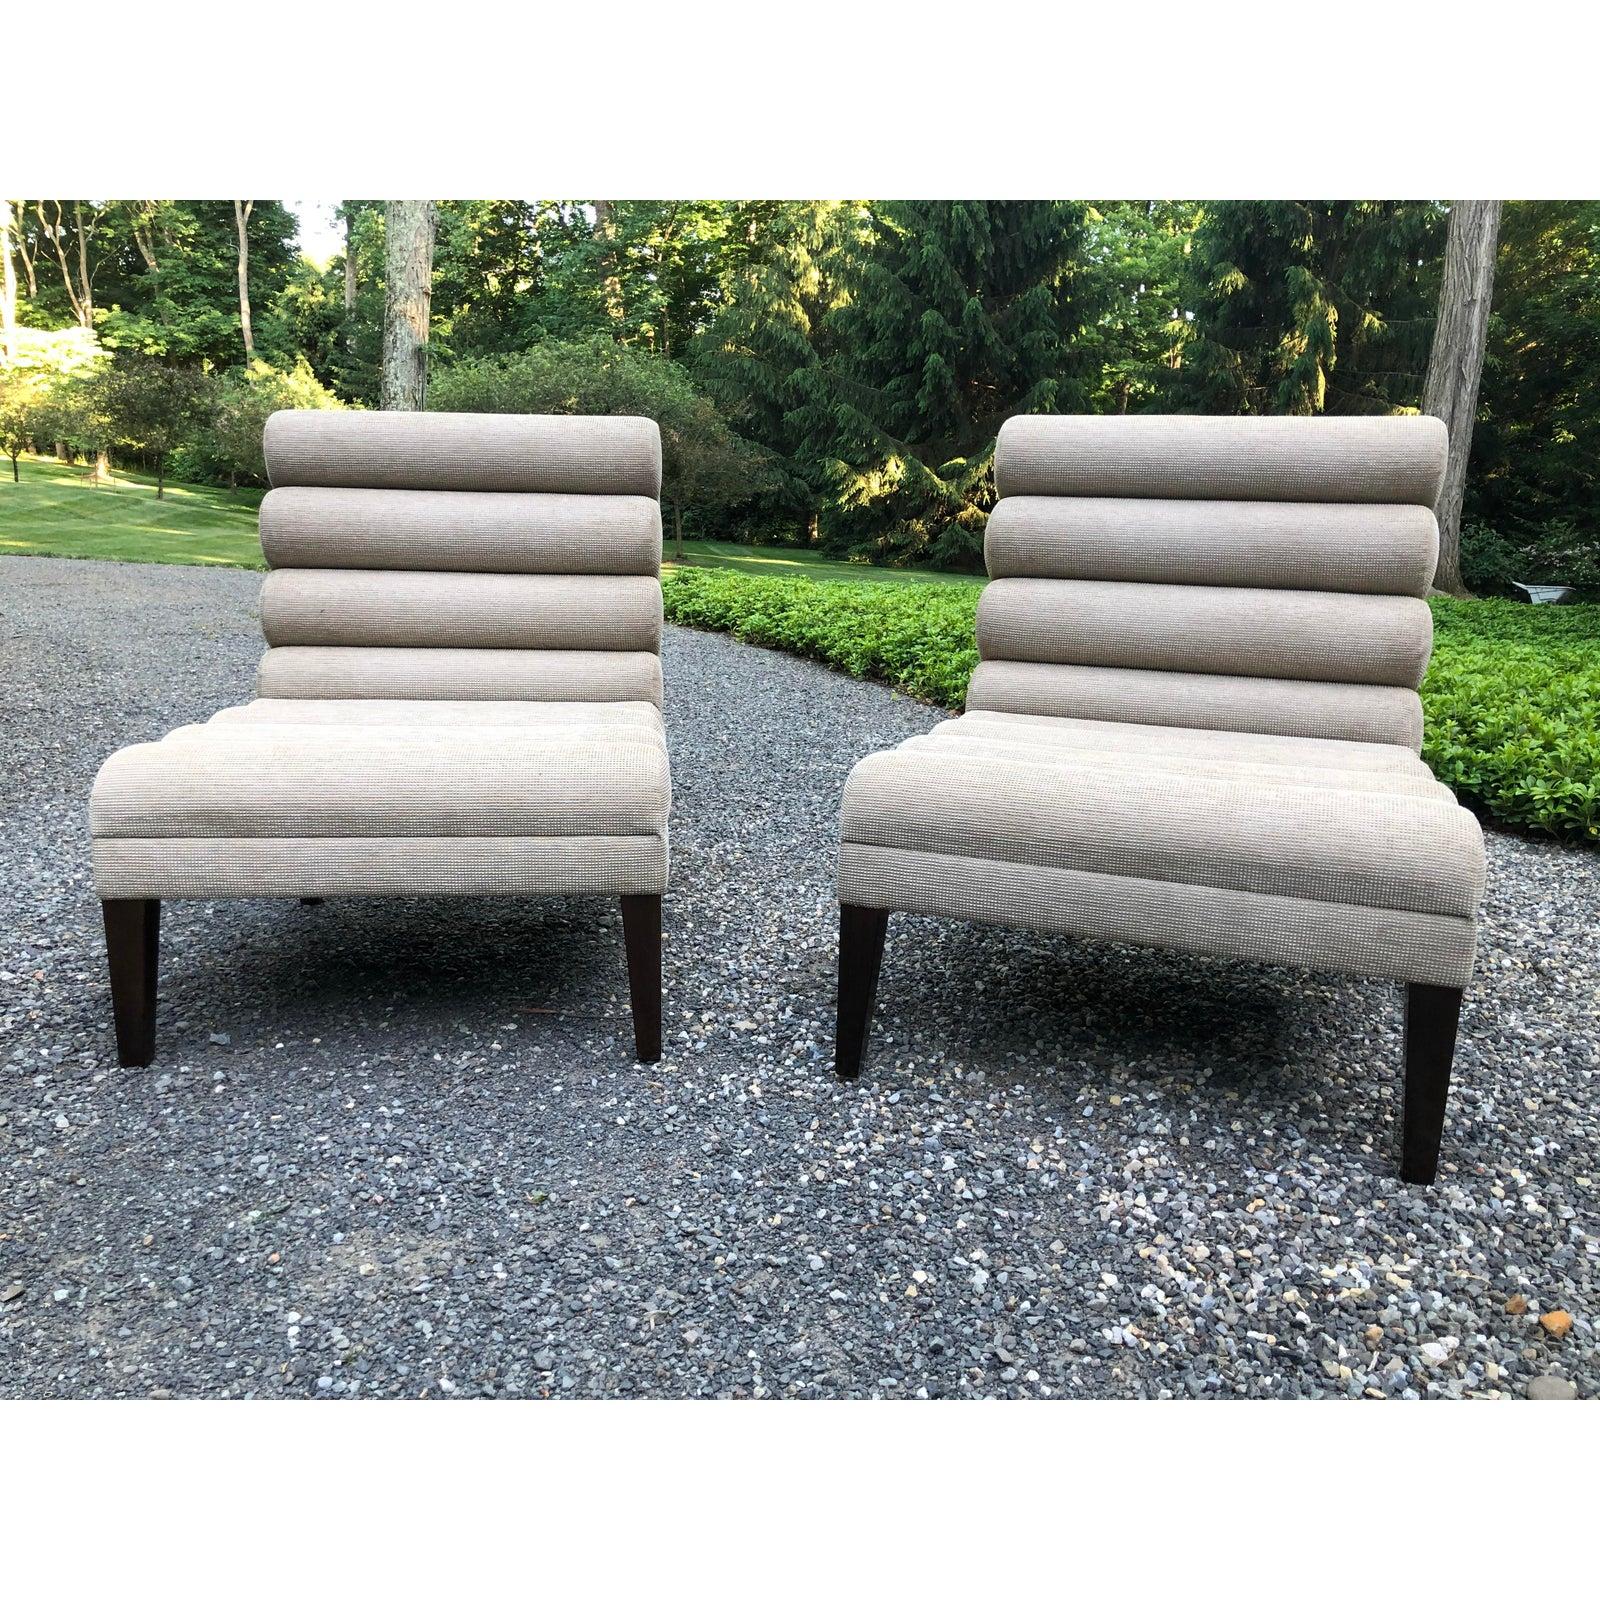 Very chic pair of Mid-Century Modern slipper chairs having a neutral textured light taupe upholstery and ebonized legs.